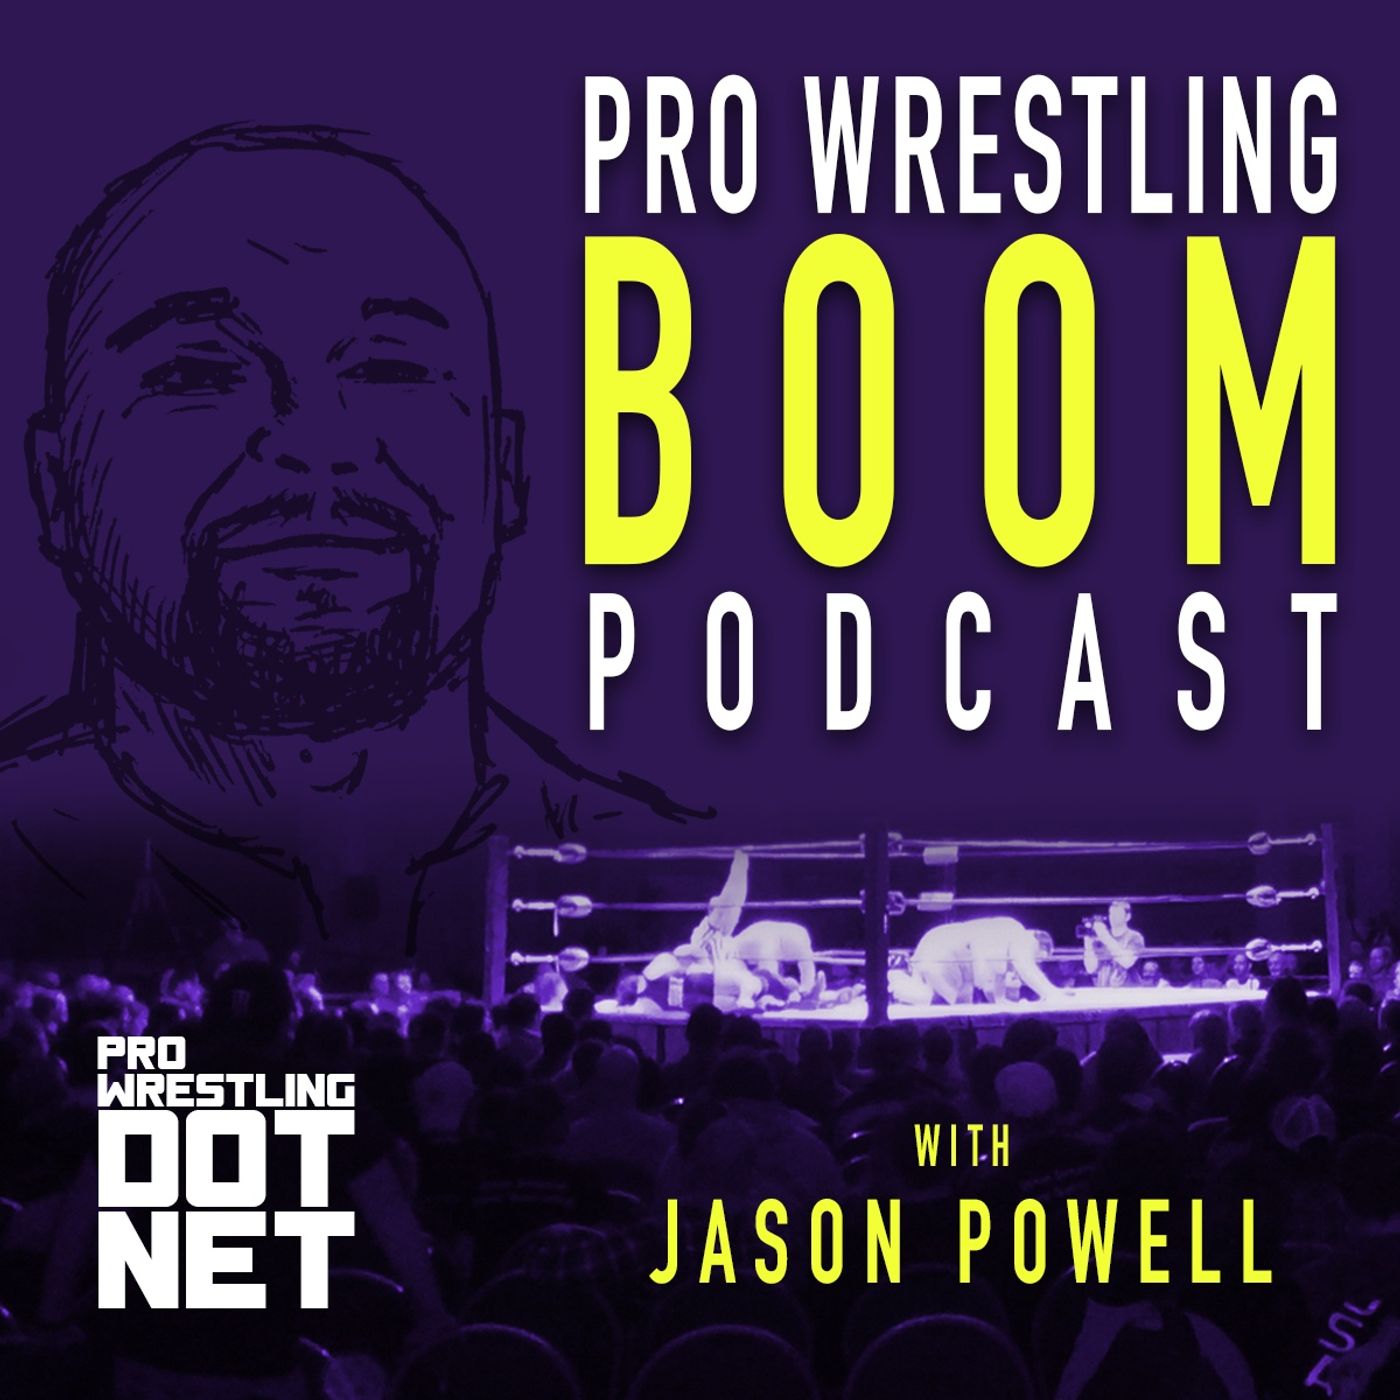 05/06 Pro Wrestling Boom Podcast With Jason Powell (Episode 308): Pro Wrestling Boom Live - WWE Backlash France talk with Jonny Fairplay 